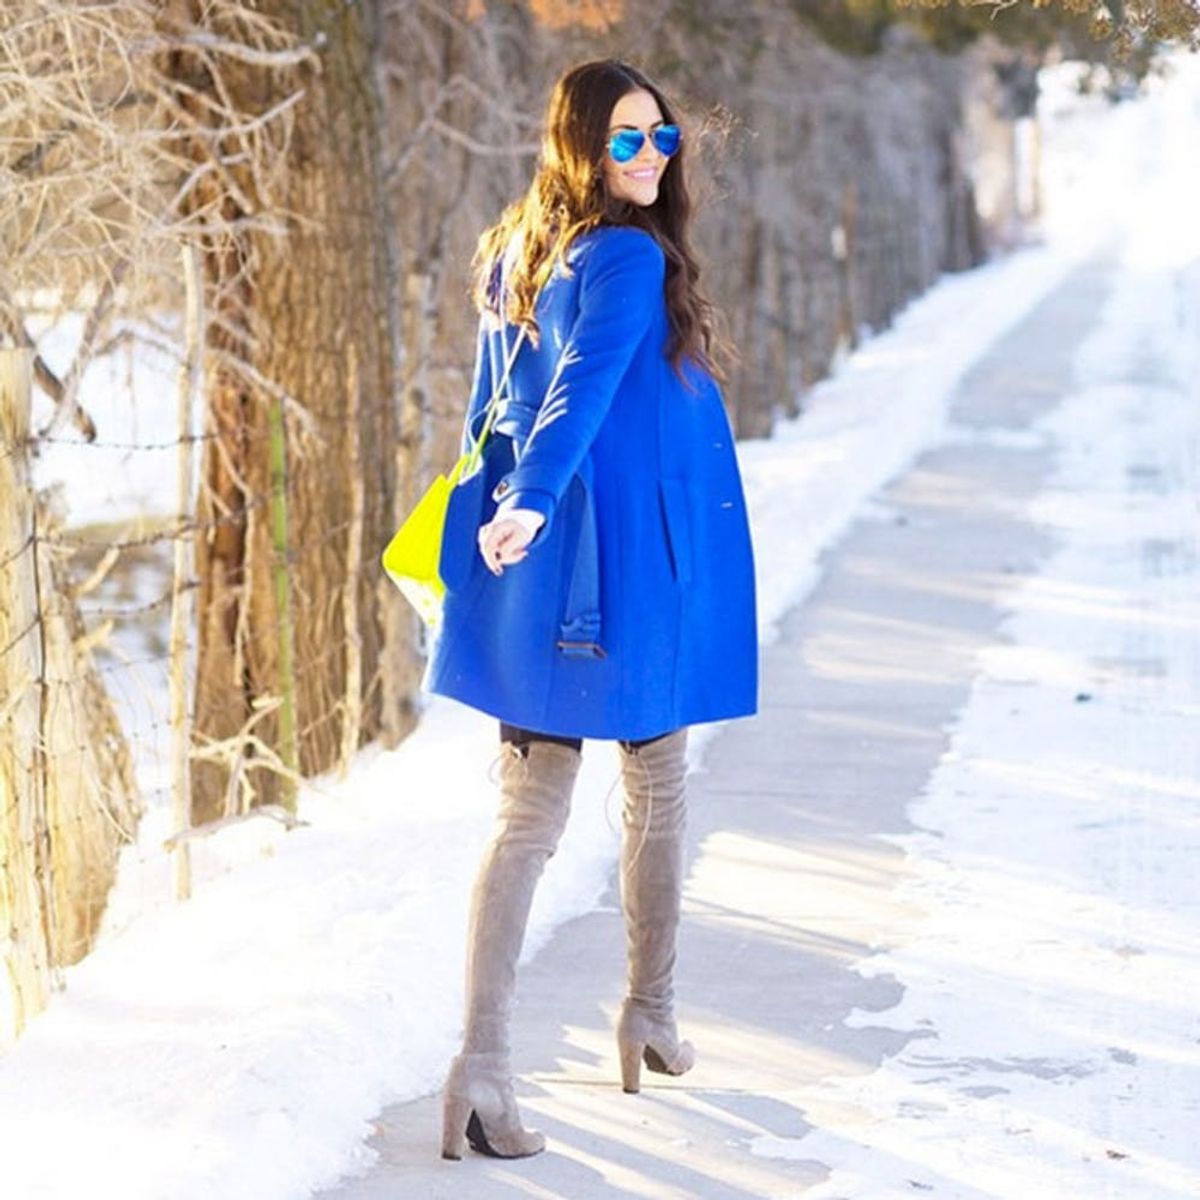 7 Style Bloggers Who Nailed the Sunglasses-in-the-Winter Look